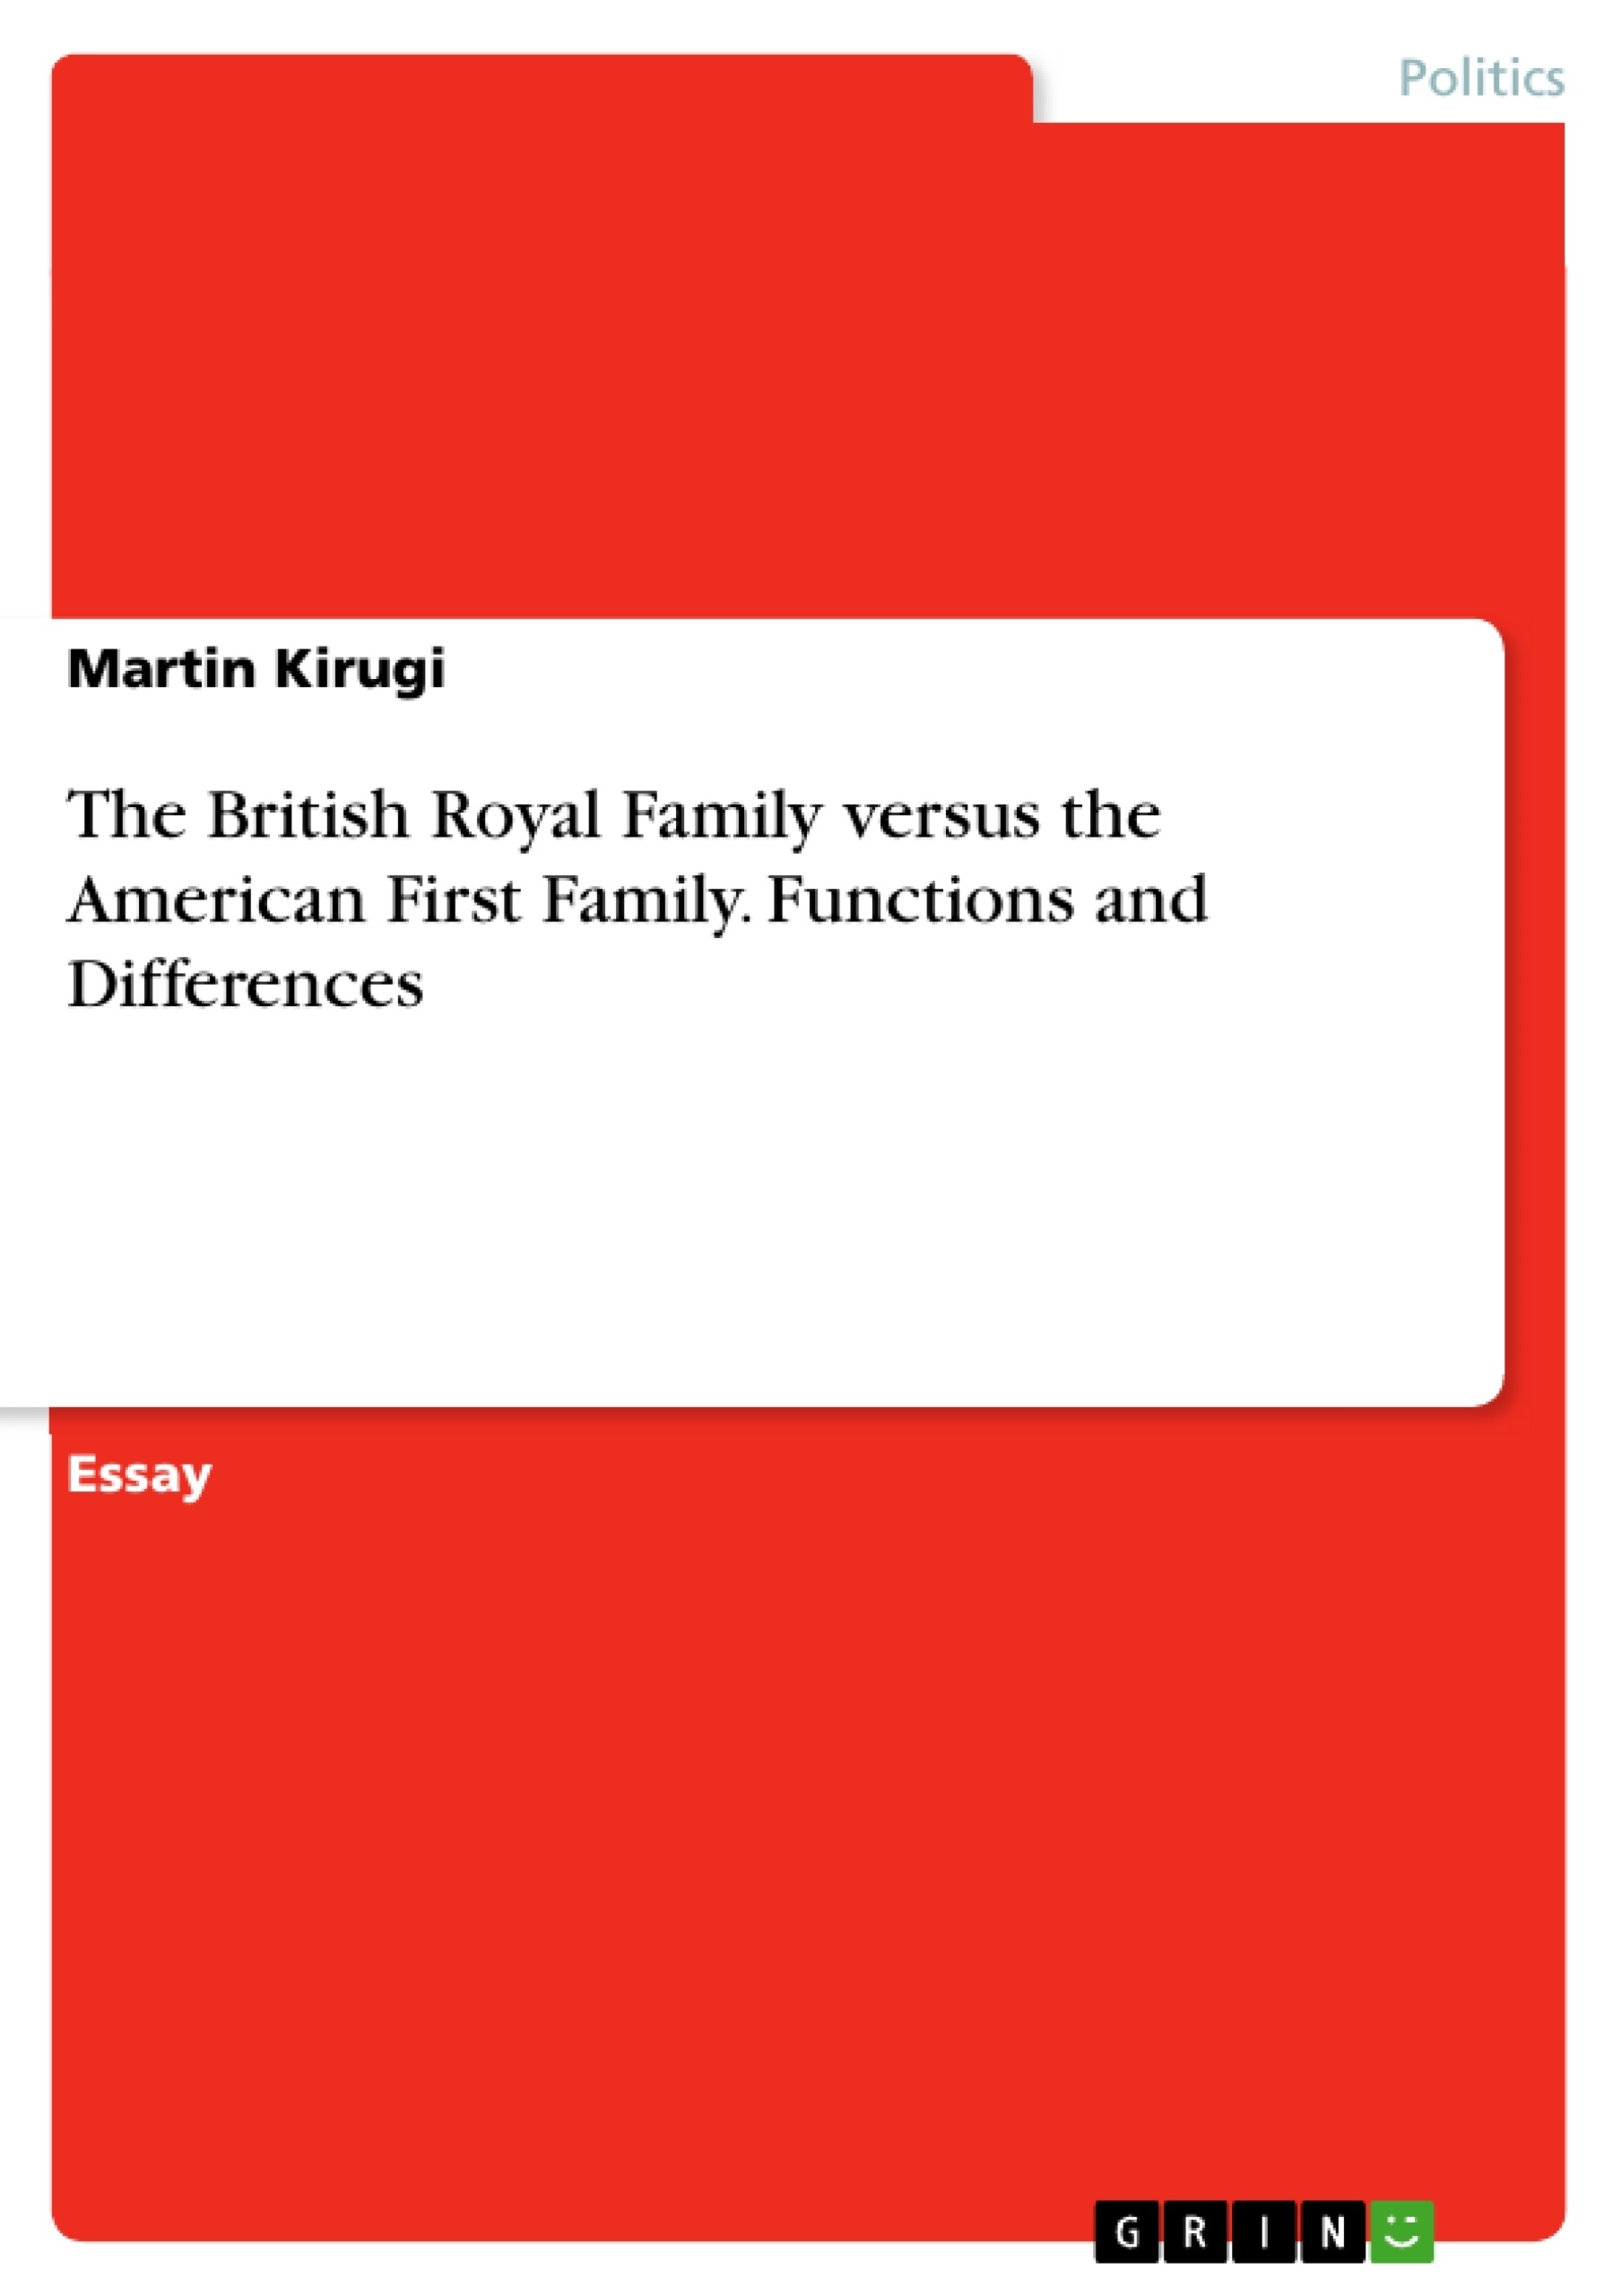 Titre: The British Royal Family versus the American First Family. Functions and Differences